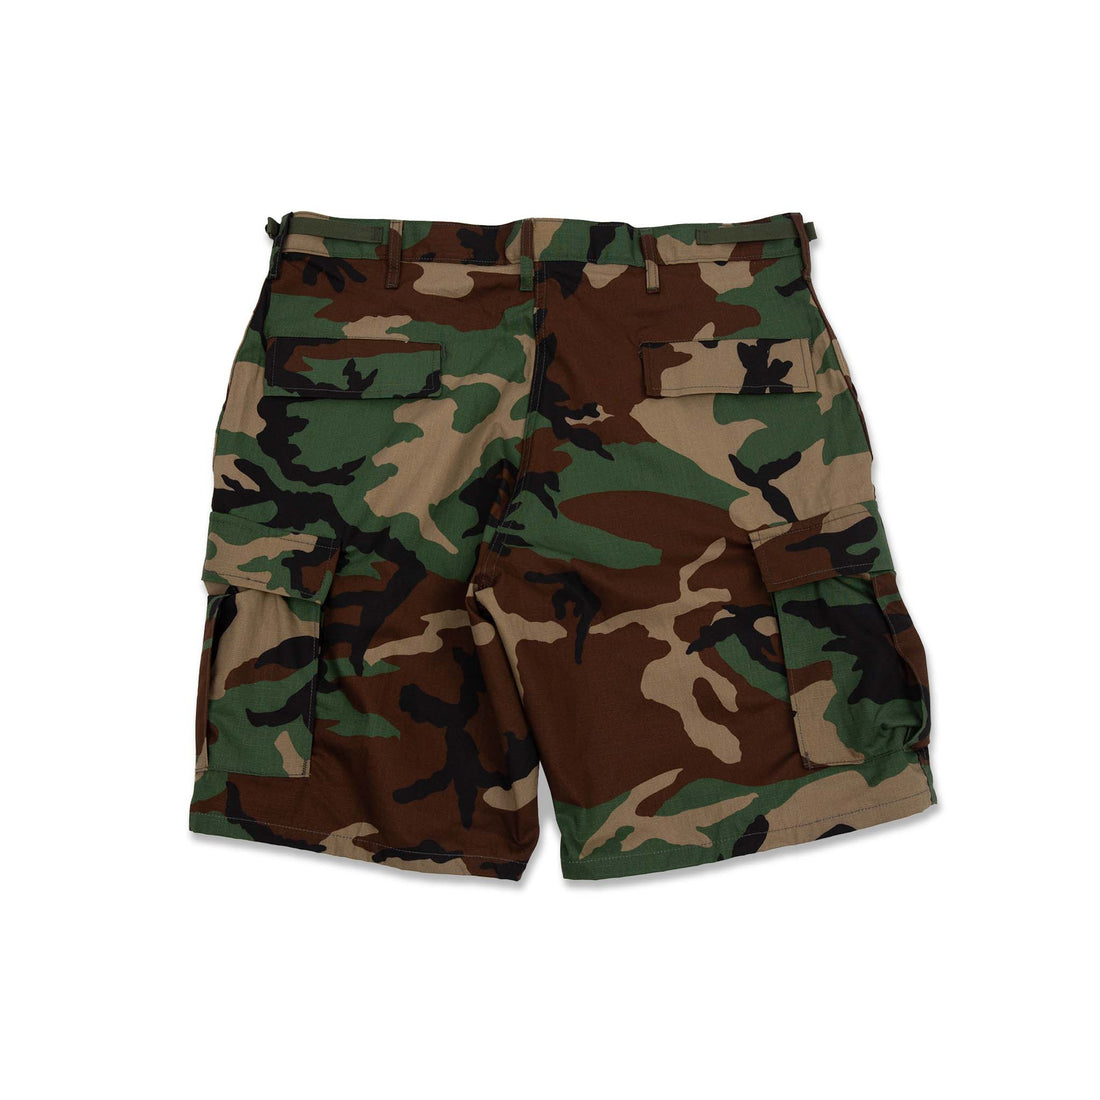 PROPPER Cargo Shorts are lightweight and breathable, they provide maximum durability in classic style with all the functional details you need. The perfect Ripstop BDU Shorts for warmer days. Propper is a manufacturer of clothing and gear for tactical, law enforcement, public safety, and military applications. Since 1967 it has been one of the main uniform suppliers to the United States military. ROSYTH TERRACE Authorized Distributor of PROPPER Singapore.